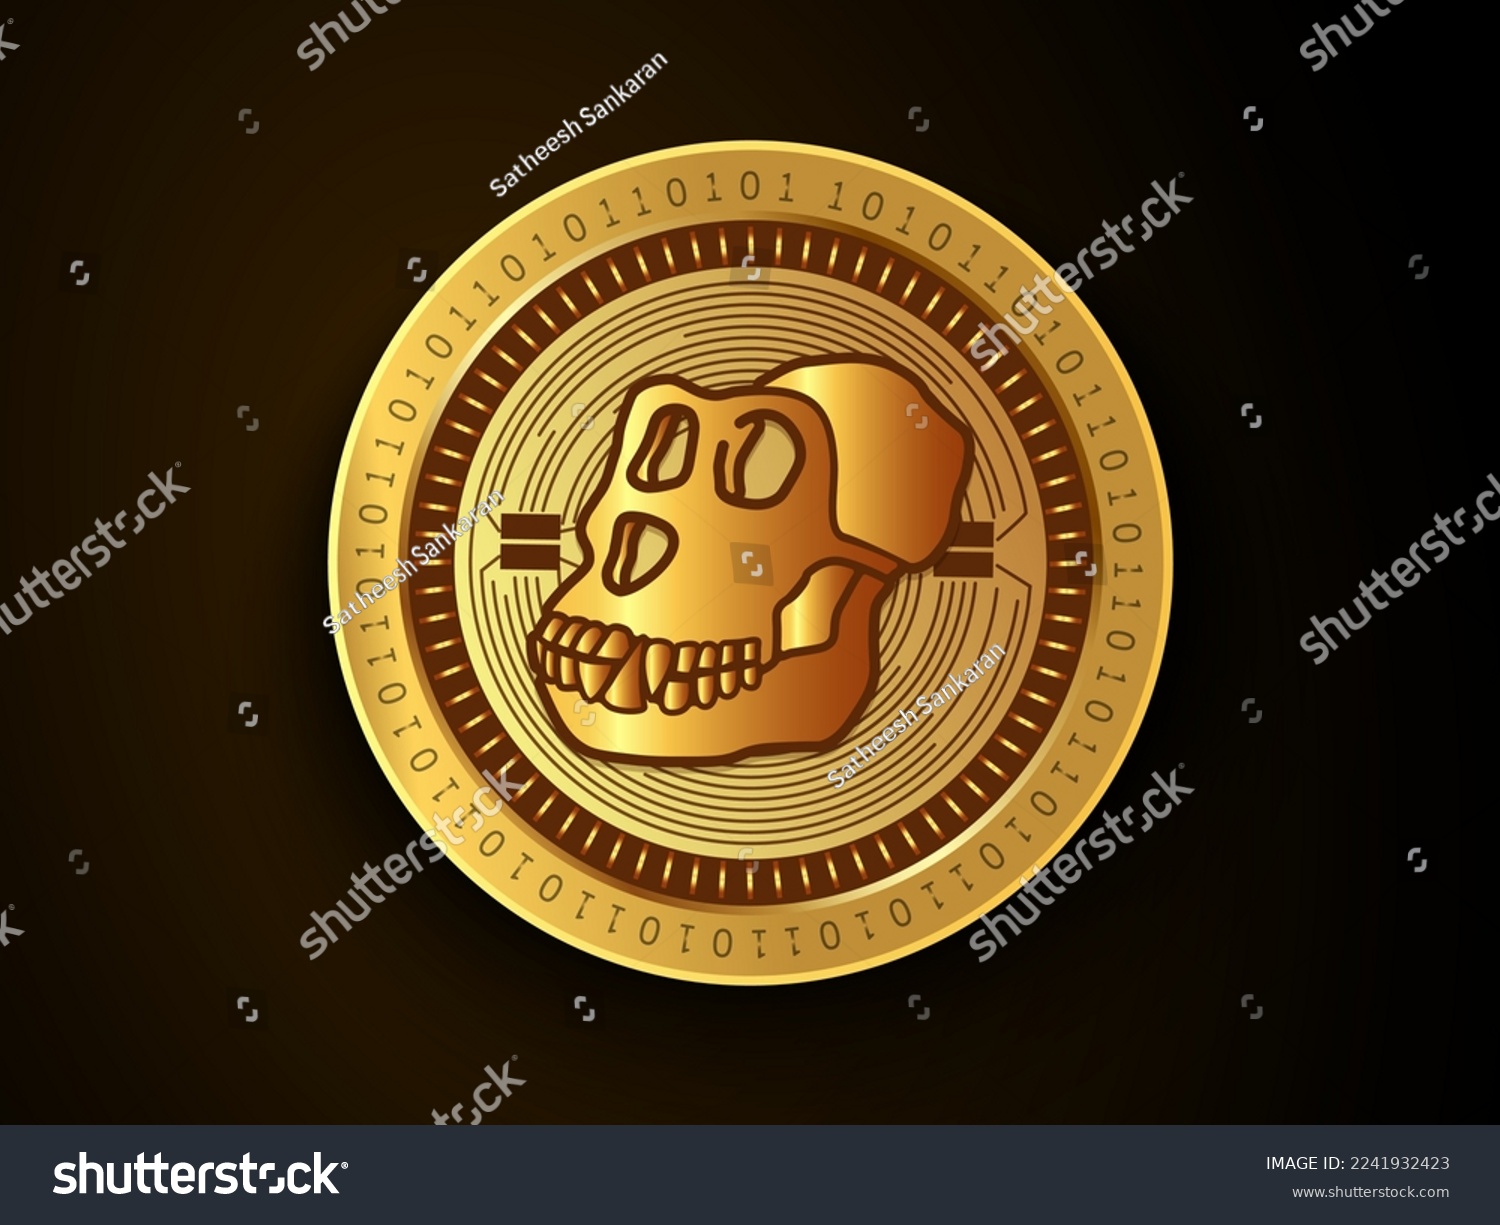 SVG of Apecoin (APE) crypto currency symbol and logo on gold coin. Virtual money concept token based on blockchain technology.  svg